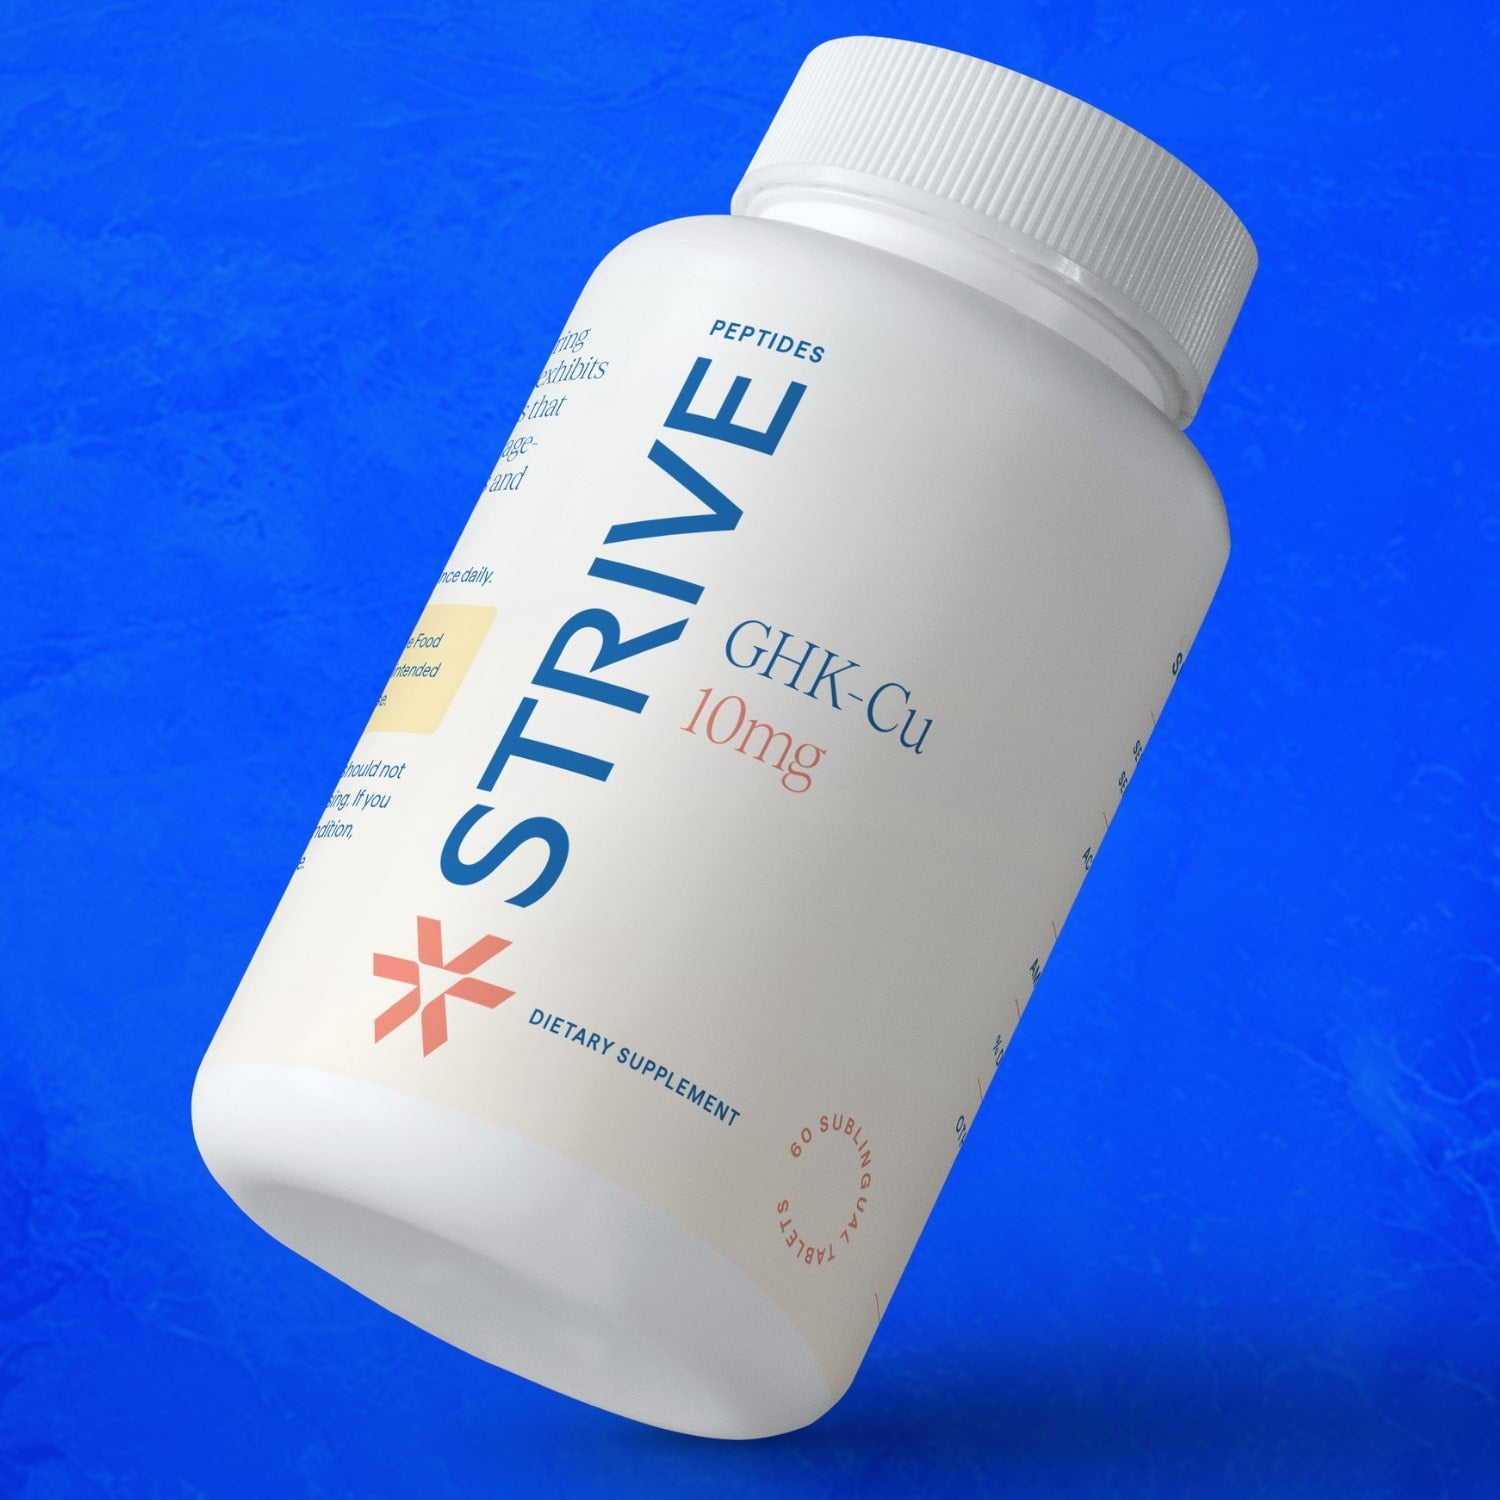 A white bottle of Strive Peptides GHK-Cu 10mg over a bright blue background